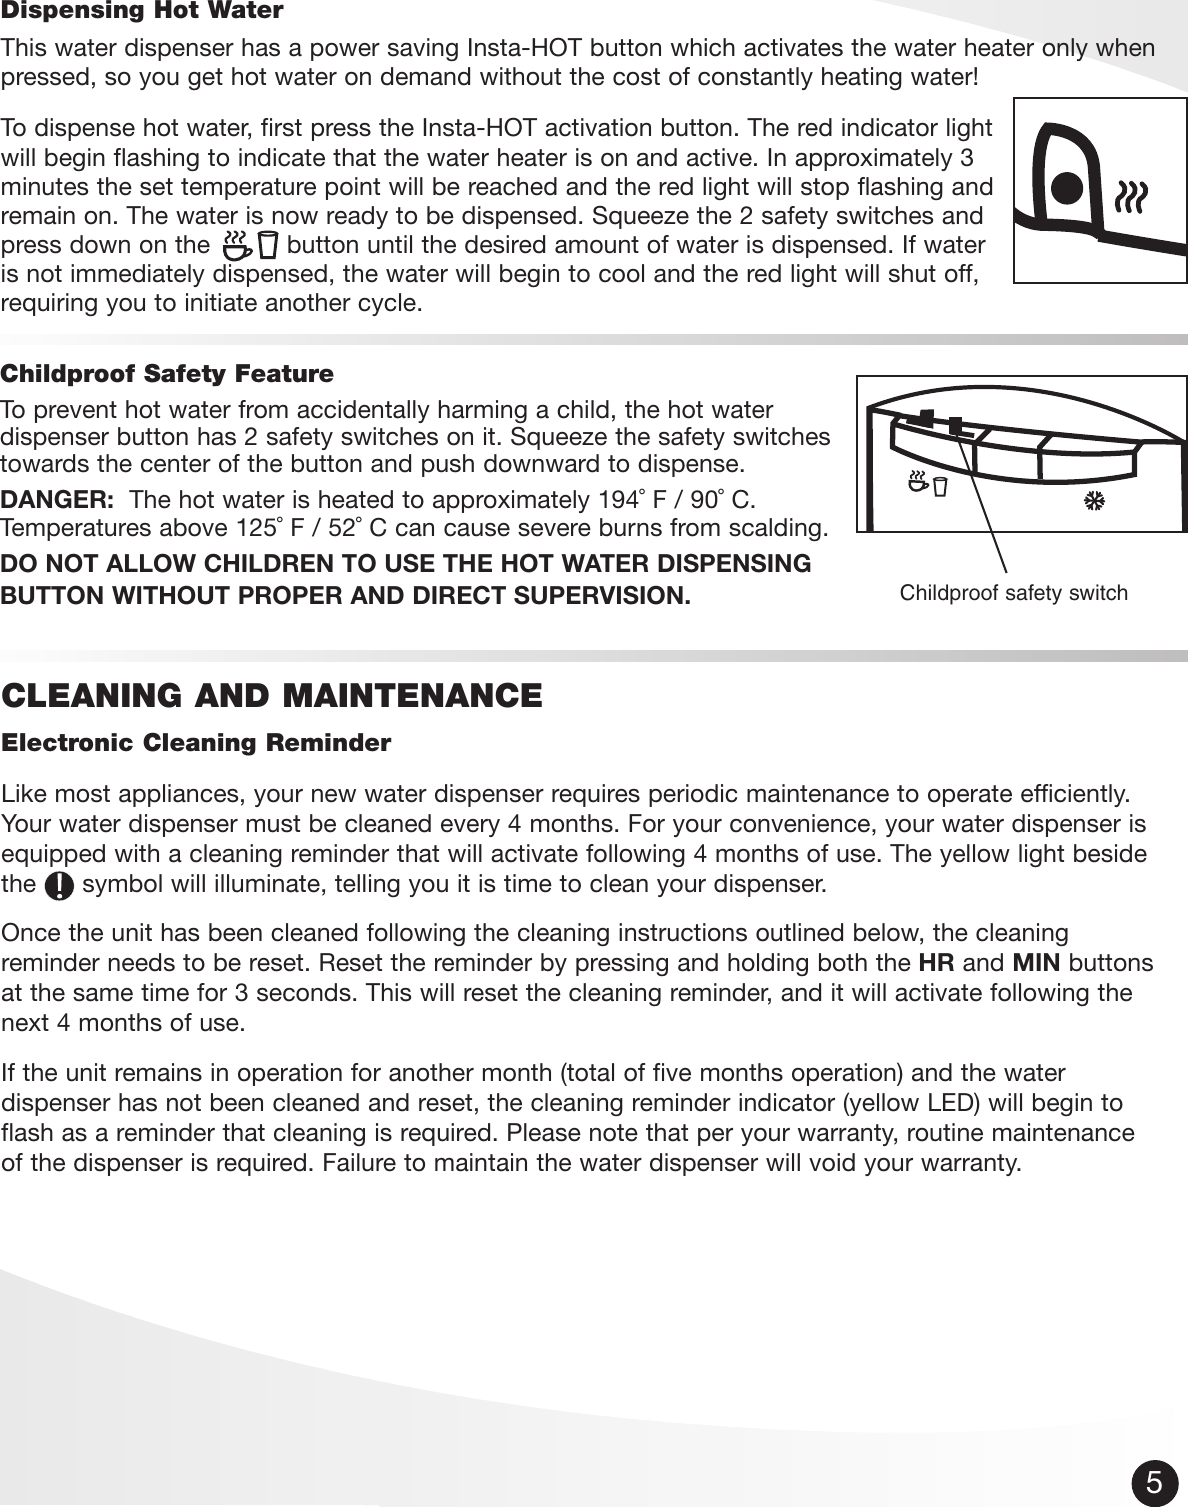 Page 6 of 10 - Vitapur Vitapur-Water-Dispenser-Use-And-Care-Manual- ManualsLib - Makes It Easy To Find Manuals Online!  Vitapur-water-dispenser-use-and-care-manual